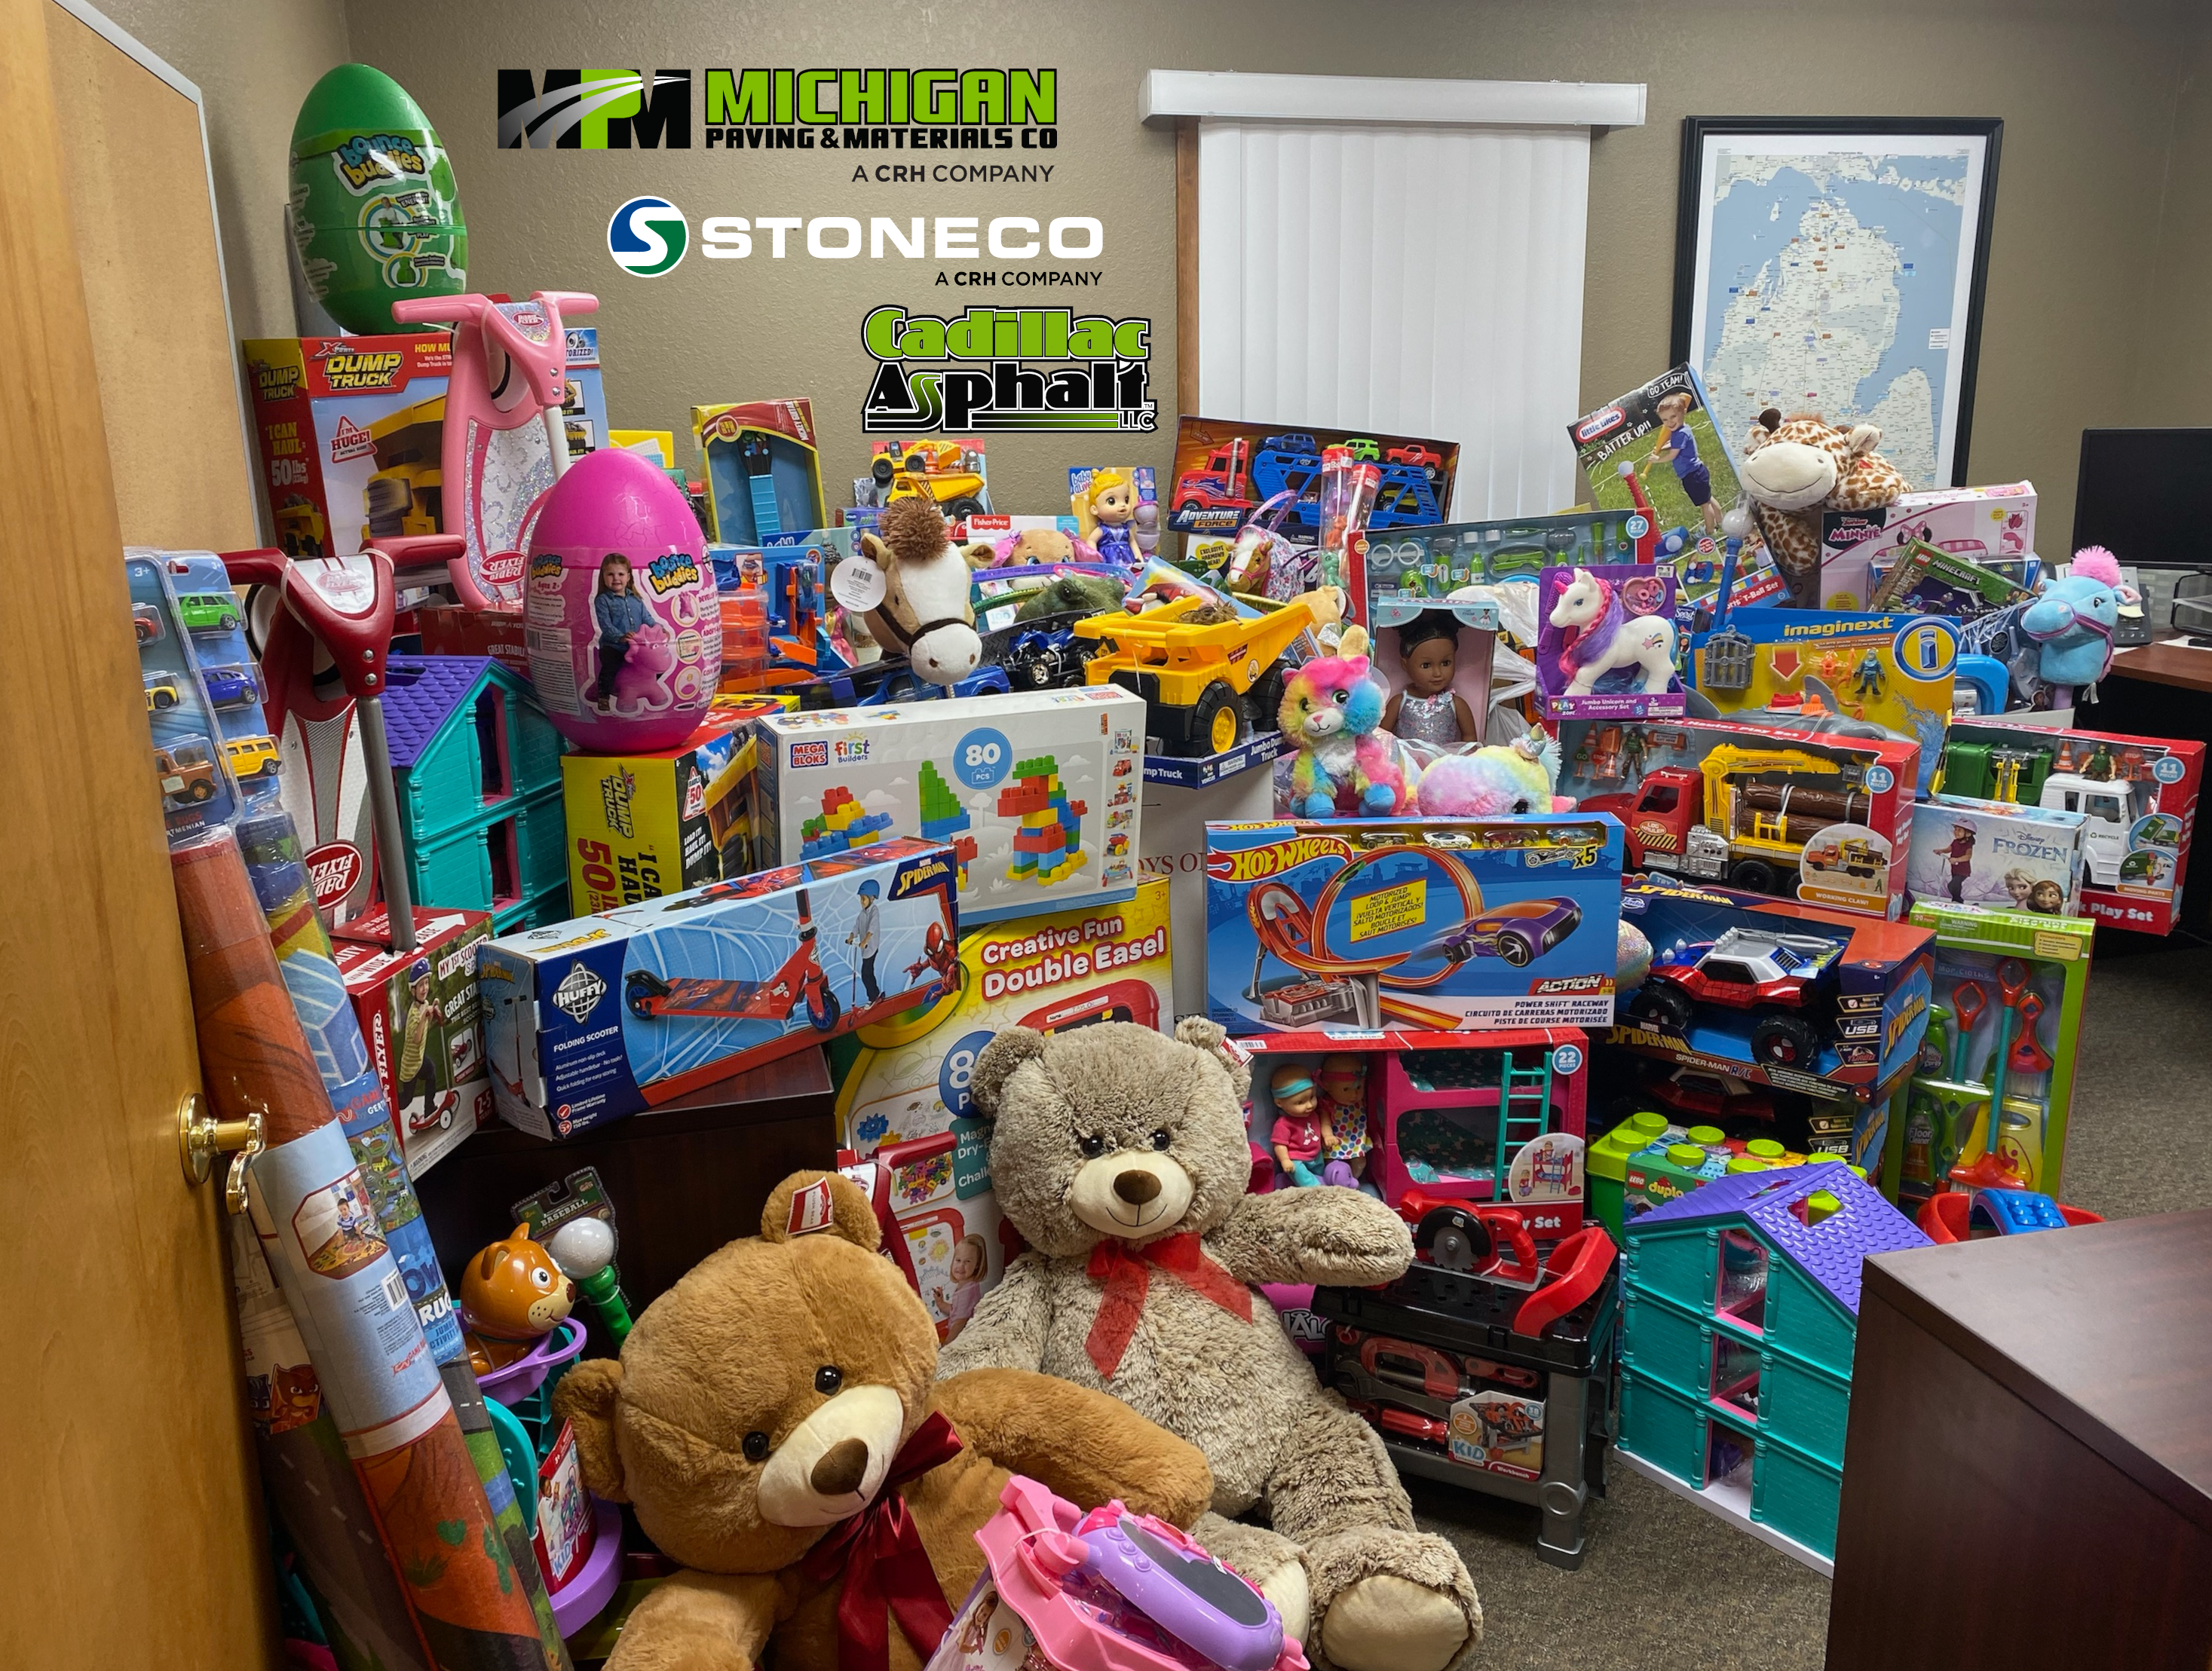 MPM Annual Toys for Tots Drive Brings Joy During A Dark Holiday Season